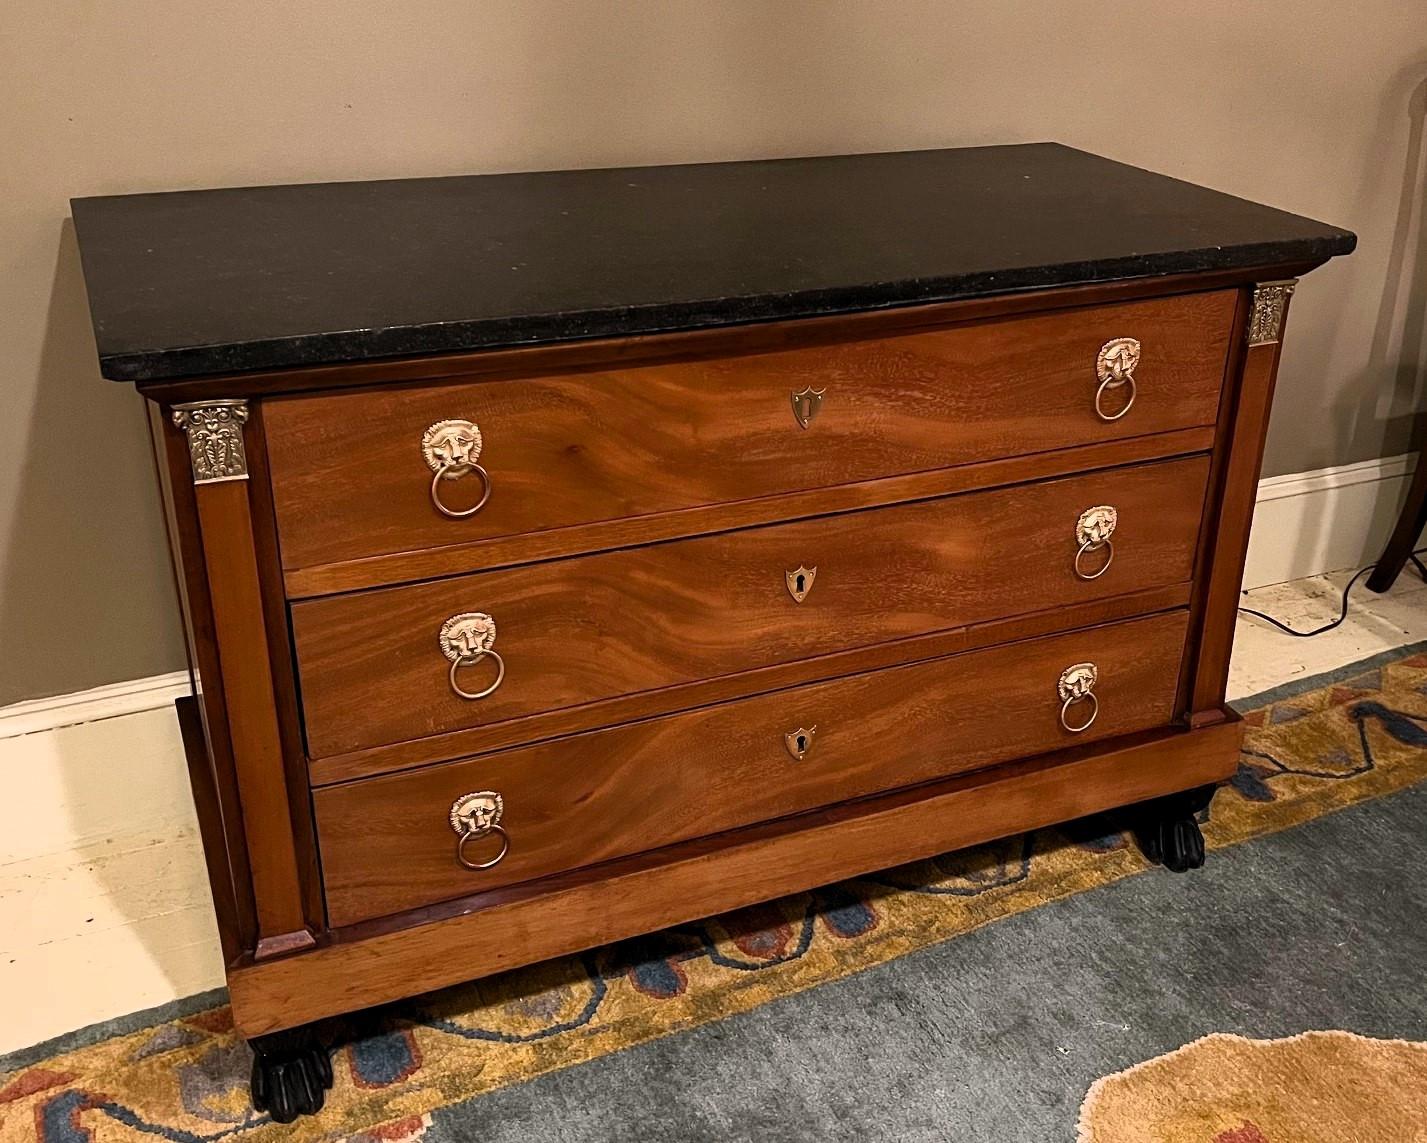 This handsome 3-drawer commode has an incomparable restrained beauty. While it has all the design elements of French Empire furniture, the application is more provincial than Parisian made pieces. The design makes this commode a perfect fit with